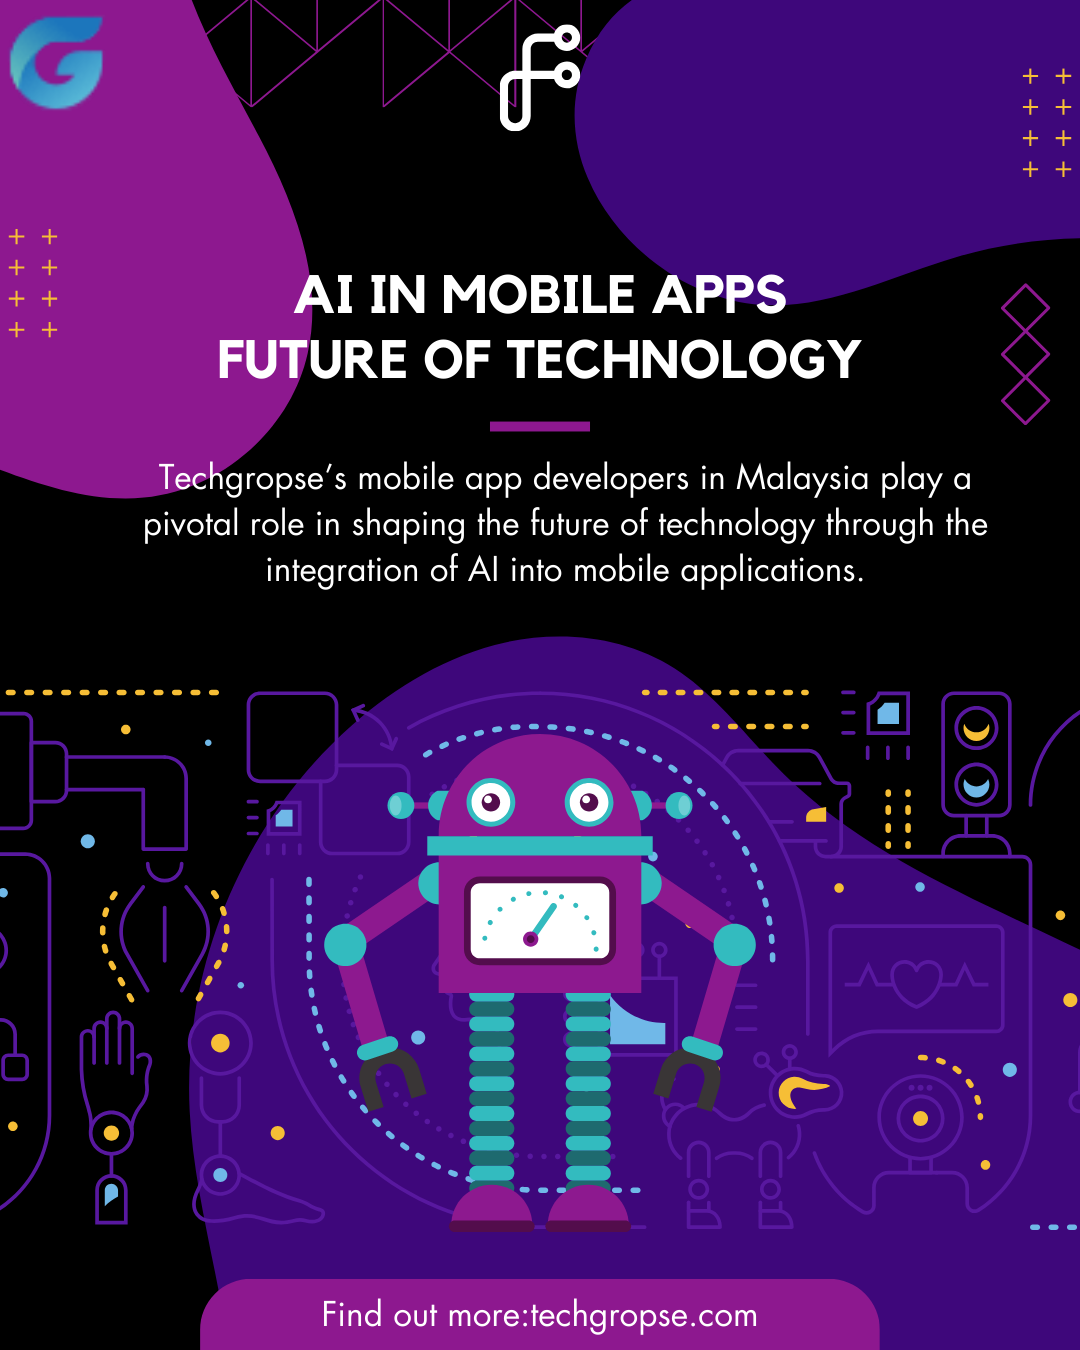 How AI In Mobile Apps Change Future Of Technology?